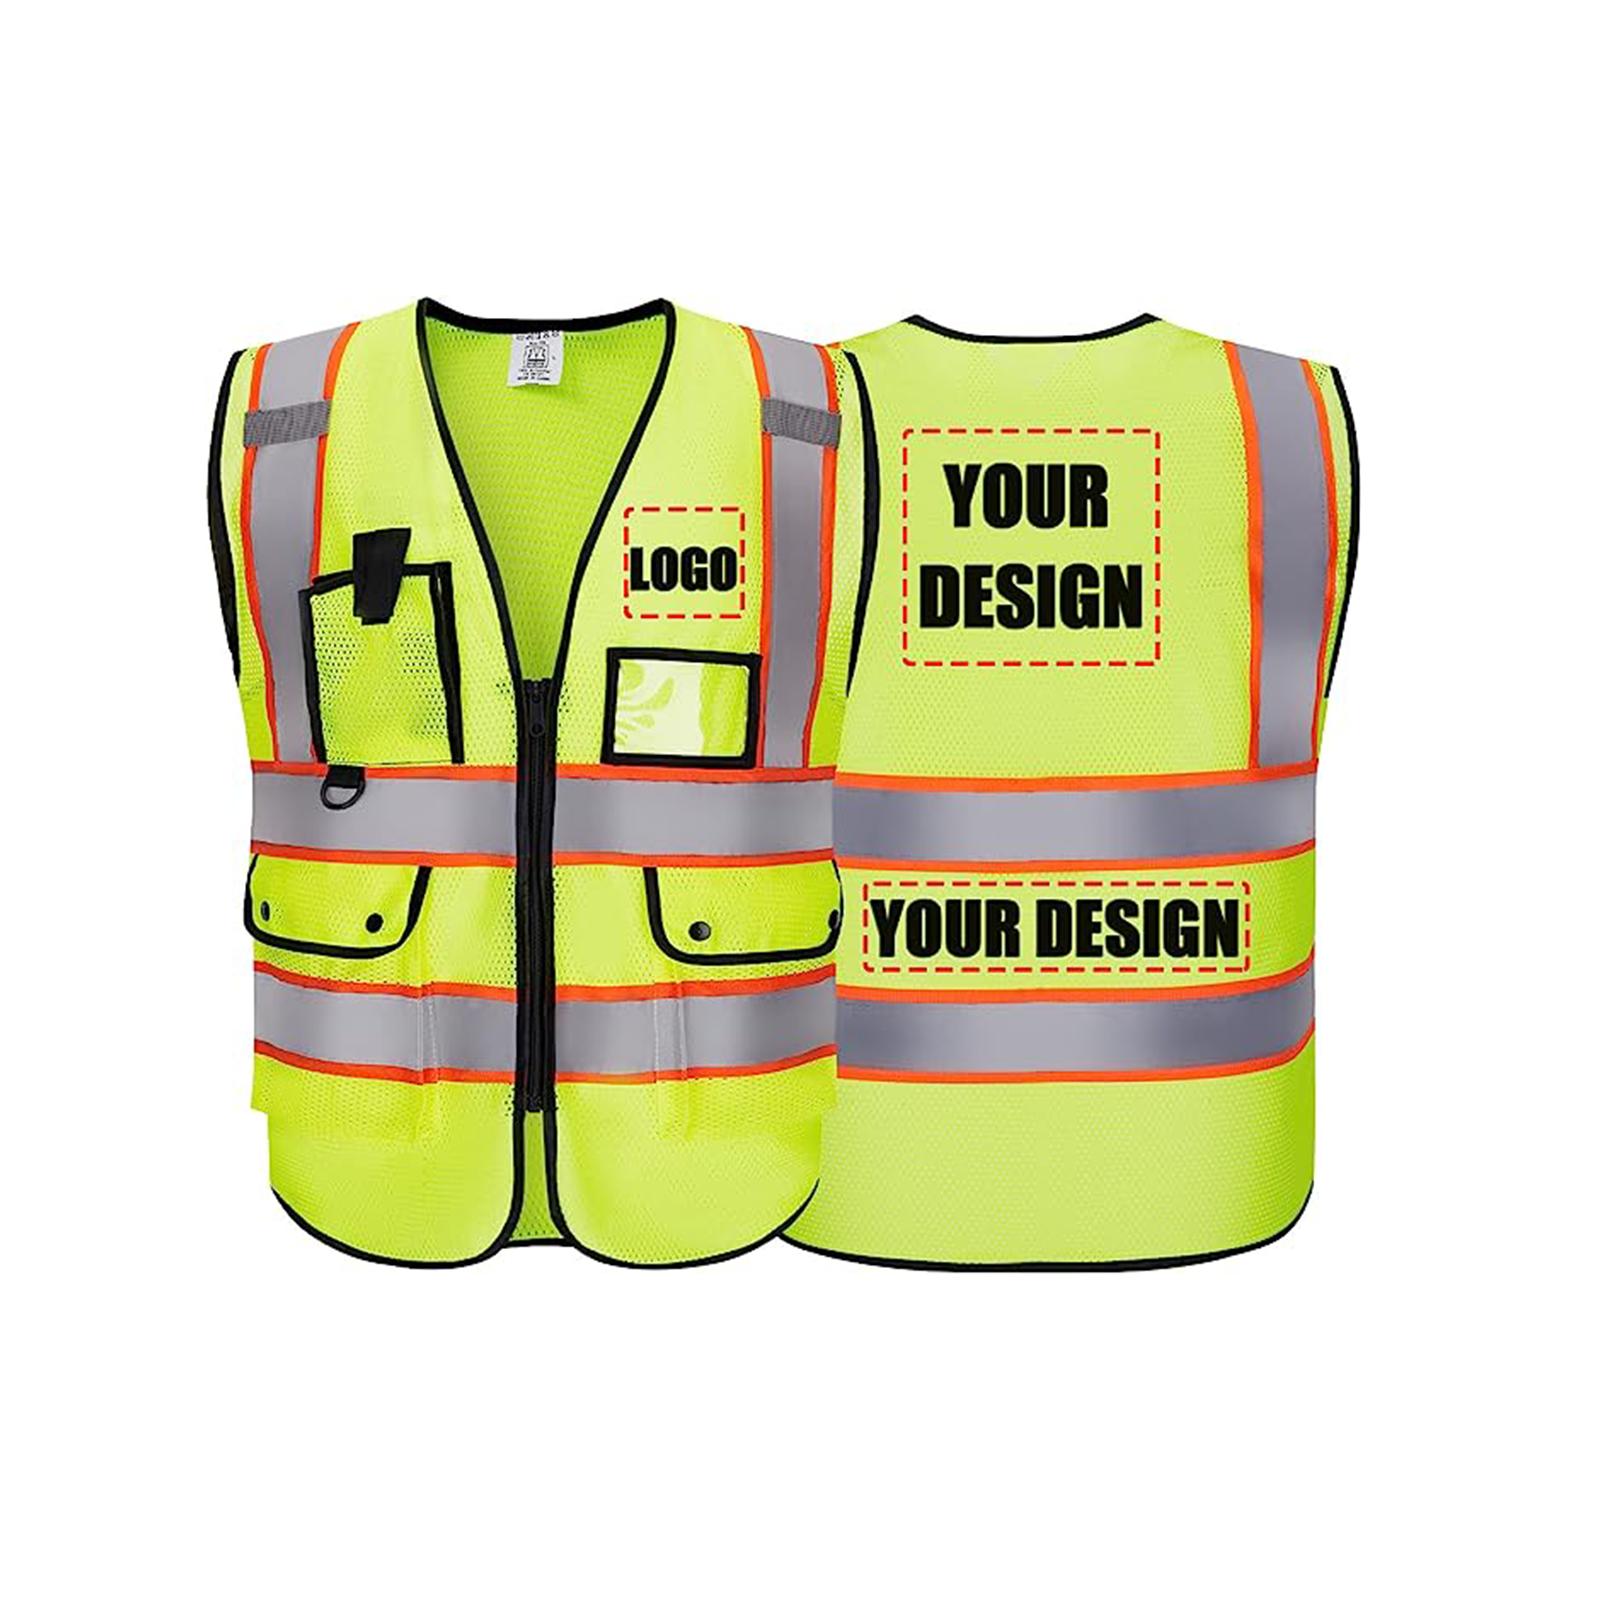 Custom Mesh Safety Vest With Logo Reflective Vest Class 2 Safety Vests Mesh Breathable With Pockets Zipper High Visibility Outdoor Protective Workwear